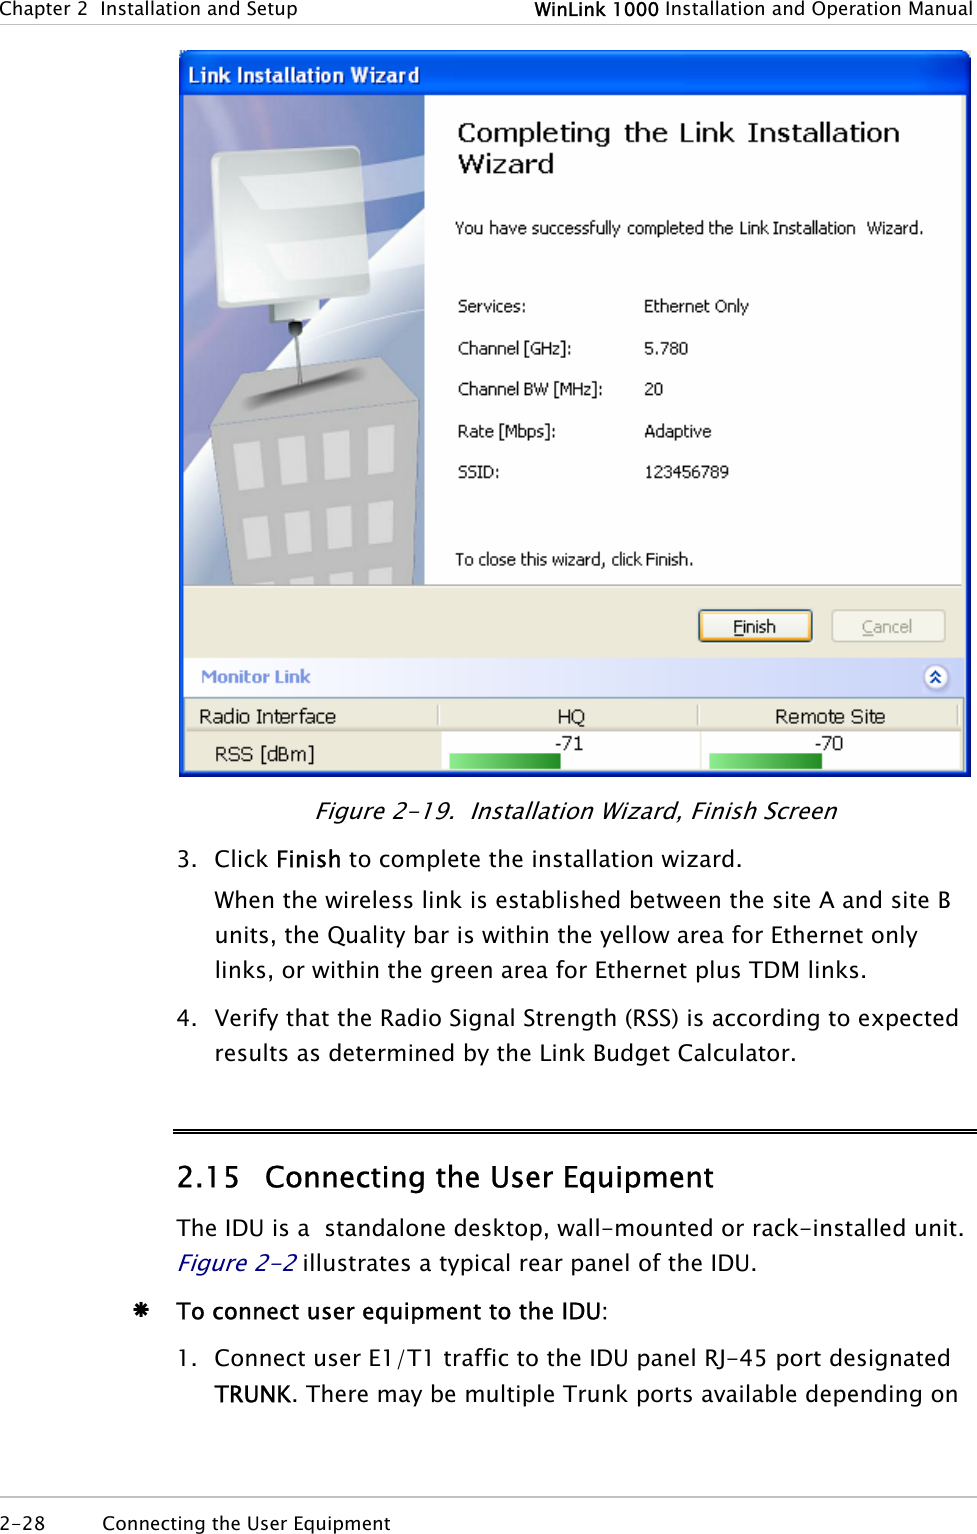 Chapter  2  Installation and Setup  WinLink 1000 Installation and Operation Manual  Figure  2-19.  Installation Wizard, Finish Screen 3. Click Finish to complete the installation wizard. When the wireless link is established between the site A and site B units, the Quality bar is within the yellow area for Ethernet only links, or within the green area for Ethernet plus TDM links. 4. Verify that the Radio Signal Strength (RSS) is according to expected results as determined by the Link Budget Calculator. 2.15 Connecting the User Equipment The IDU is a  standalone desktop, wall-mounted or rack-installed unit. Figure  2-2 illustrates a typical rear panel of the IDU. Æ To connect user equipment to the IDU: 1. Connect user E1/T1 traffic to the IDU panel RJ-45 port designated TRUNK. There may be multiple Trunk ports available depending on 2-28  Connecting the User Equipment   